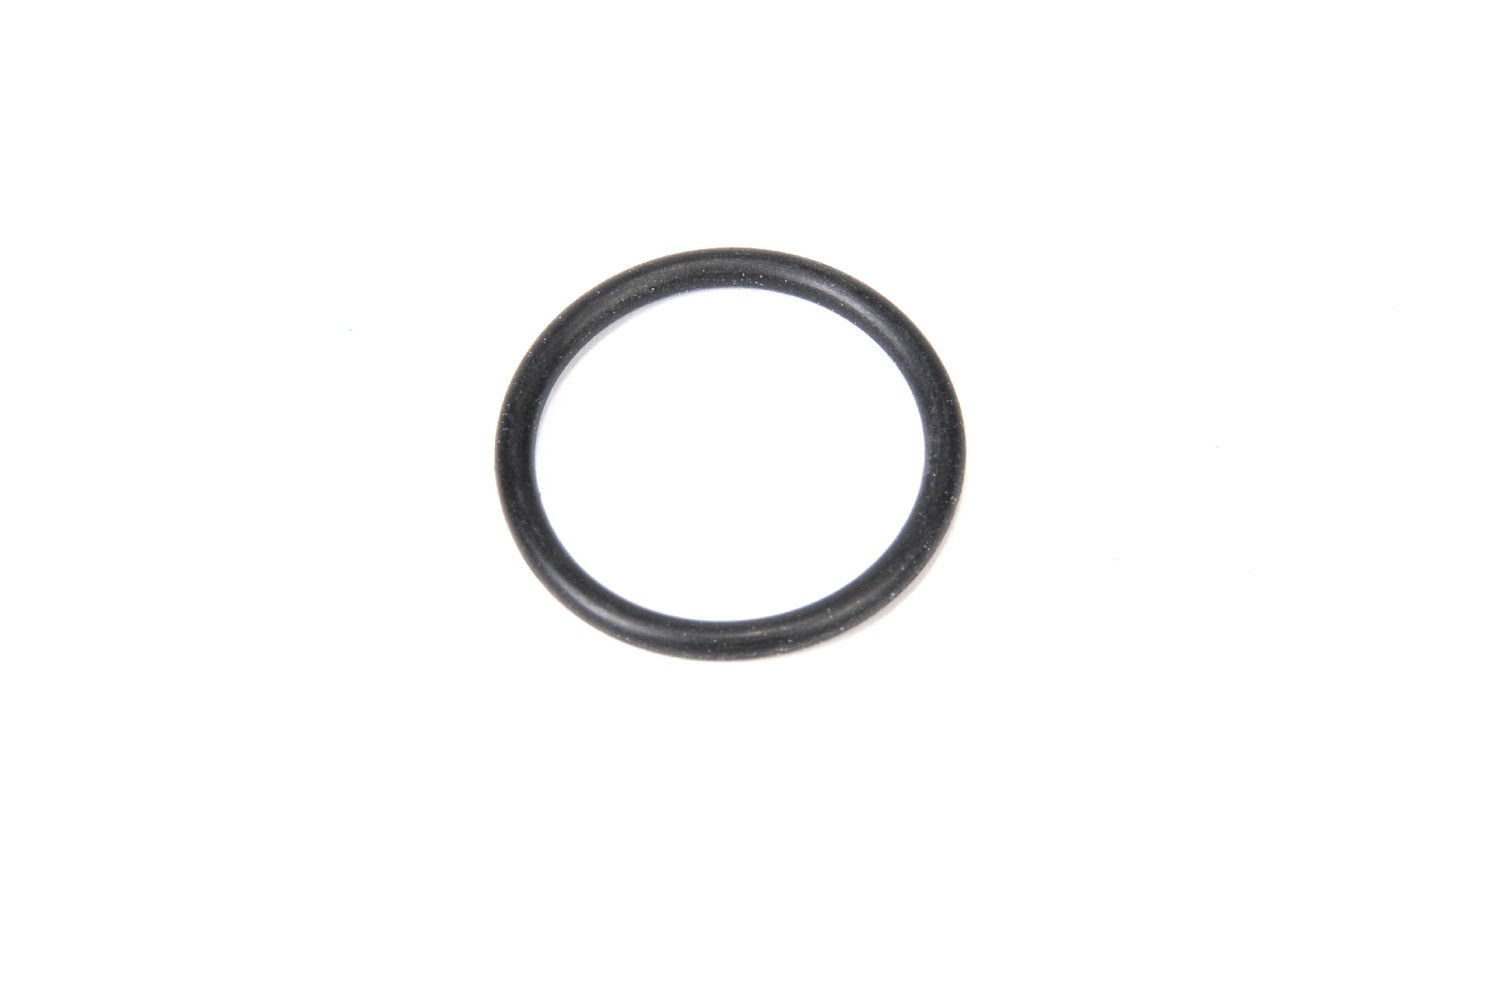 GM GENUINE PARTS - Automatic Transmission Filter O-Ring - GMP 19317990